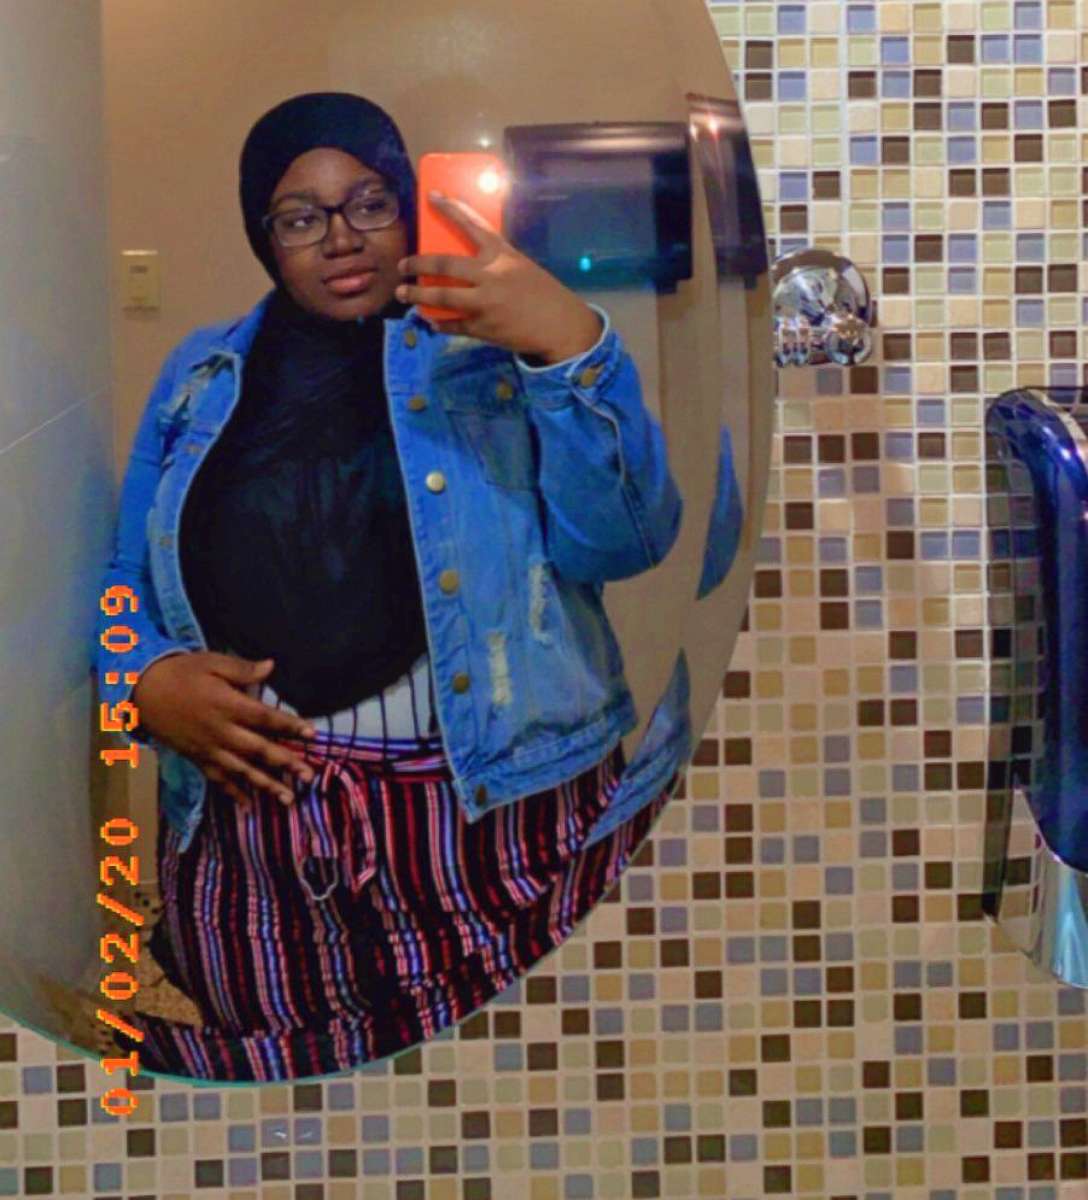 PHOTO: Stefanae Coleman of Texas poses in front of a mirror wearing a hijab in a photo timestamped Jan. 2, 2020.